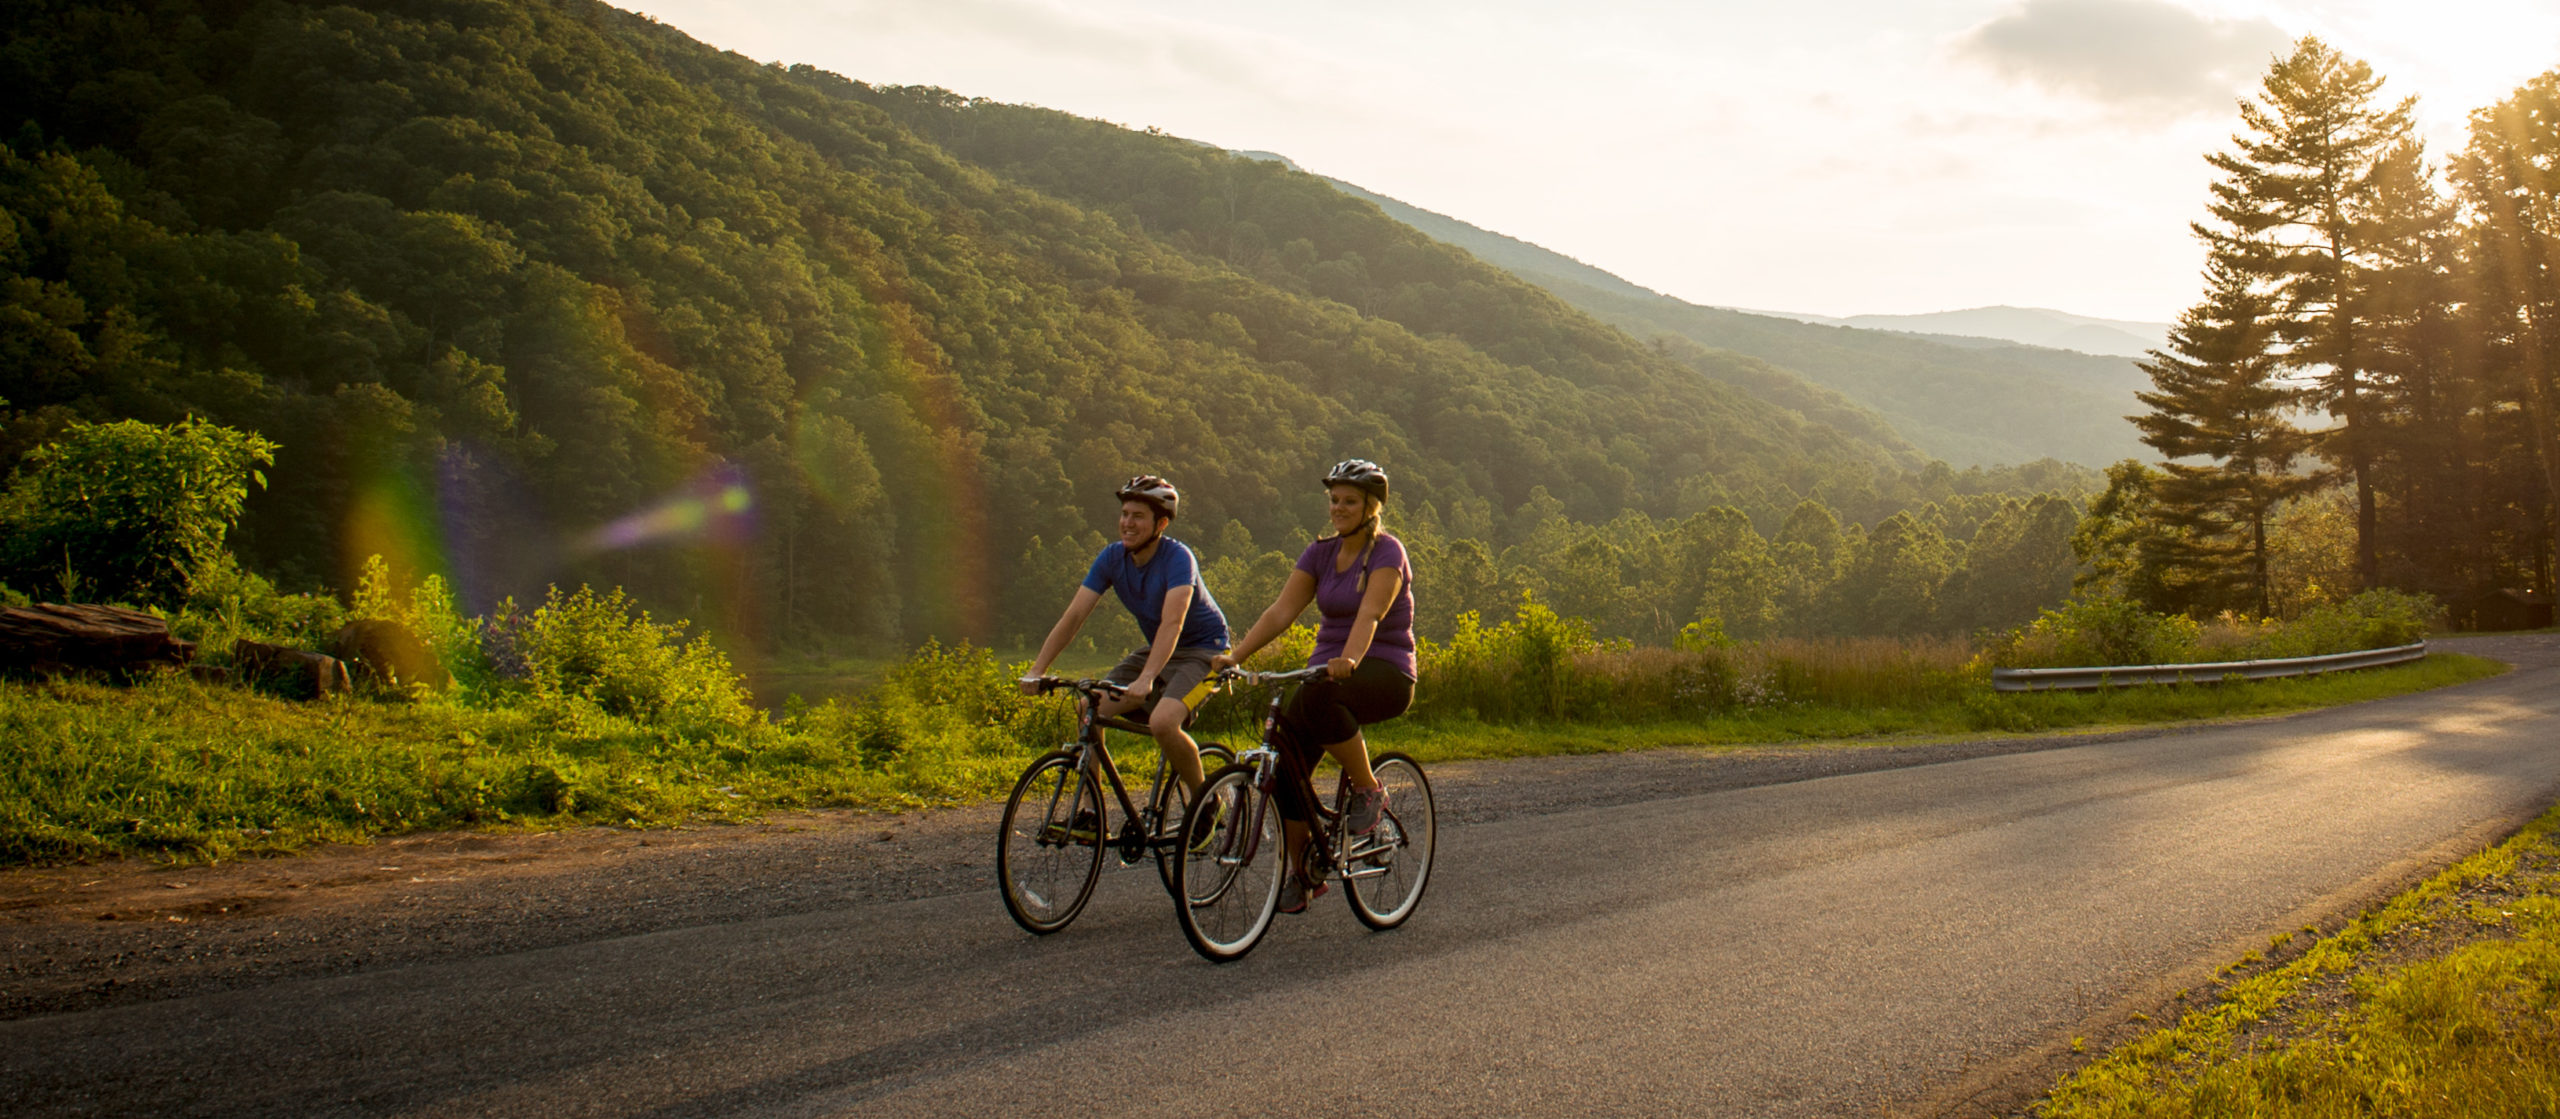 Stokesville Lodge Bicycling. Scott K. Brown Photography courtesy Virginia Tourism Corporation.